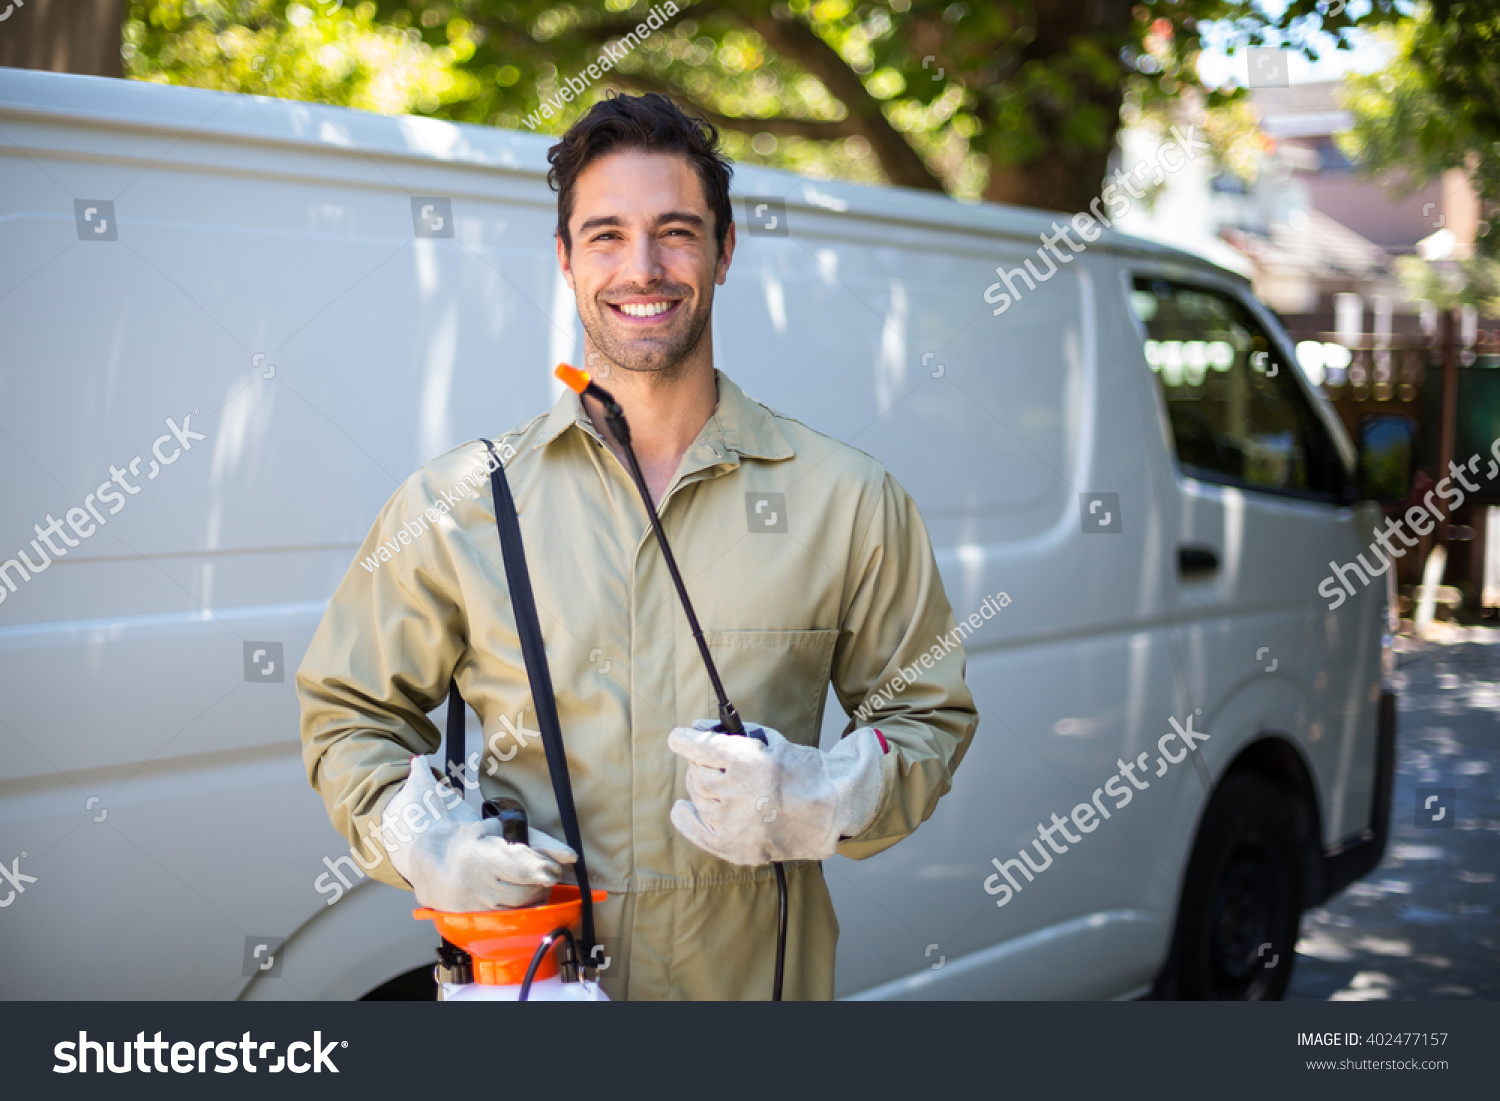 Portrait of smiling worker with pesticide sprayer while standing by van #402477157